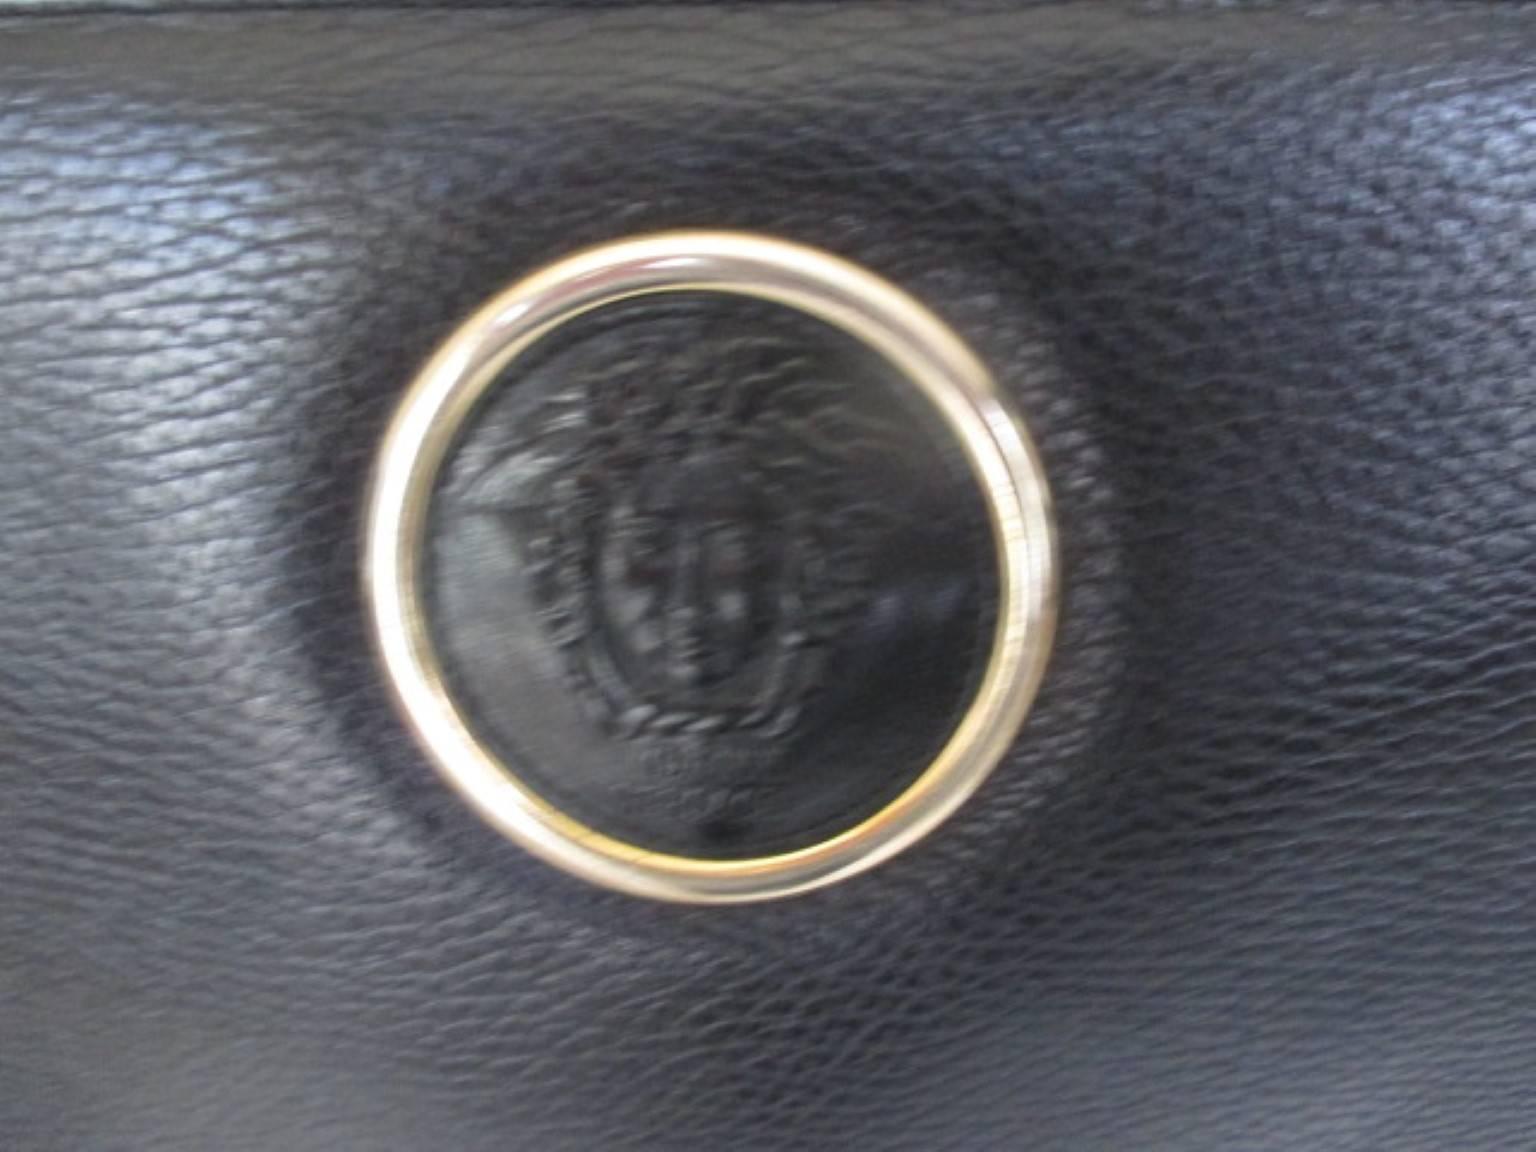 Gianni Versace black leather medusa bag In Good Condition For Sale In Amsterdam, NL